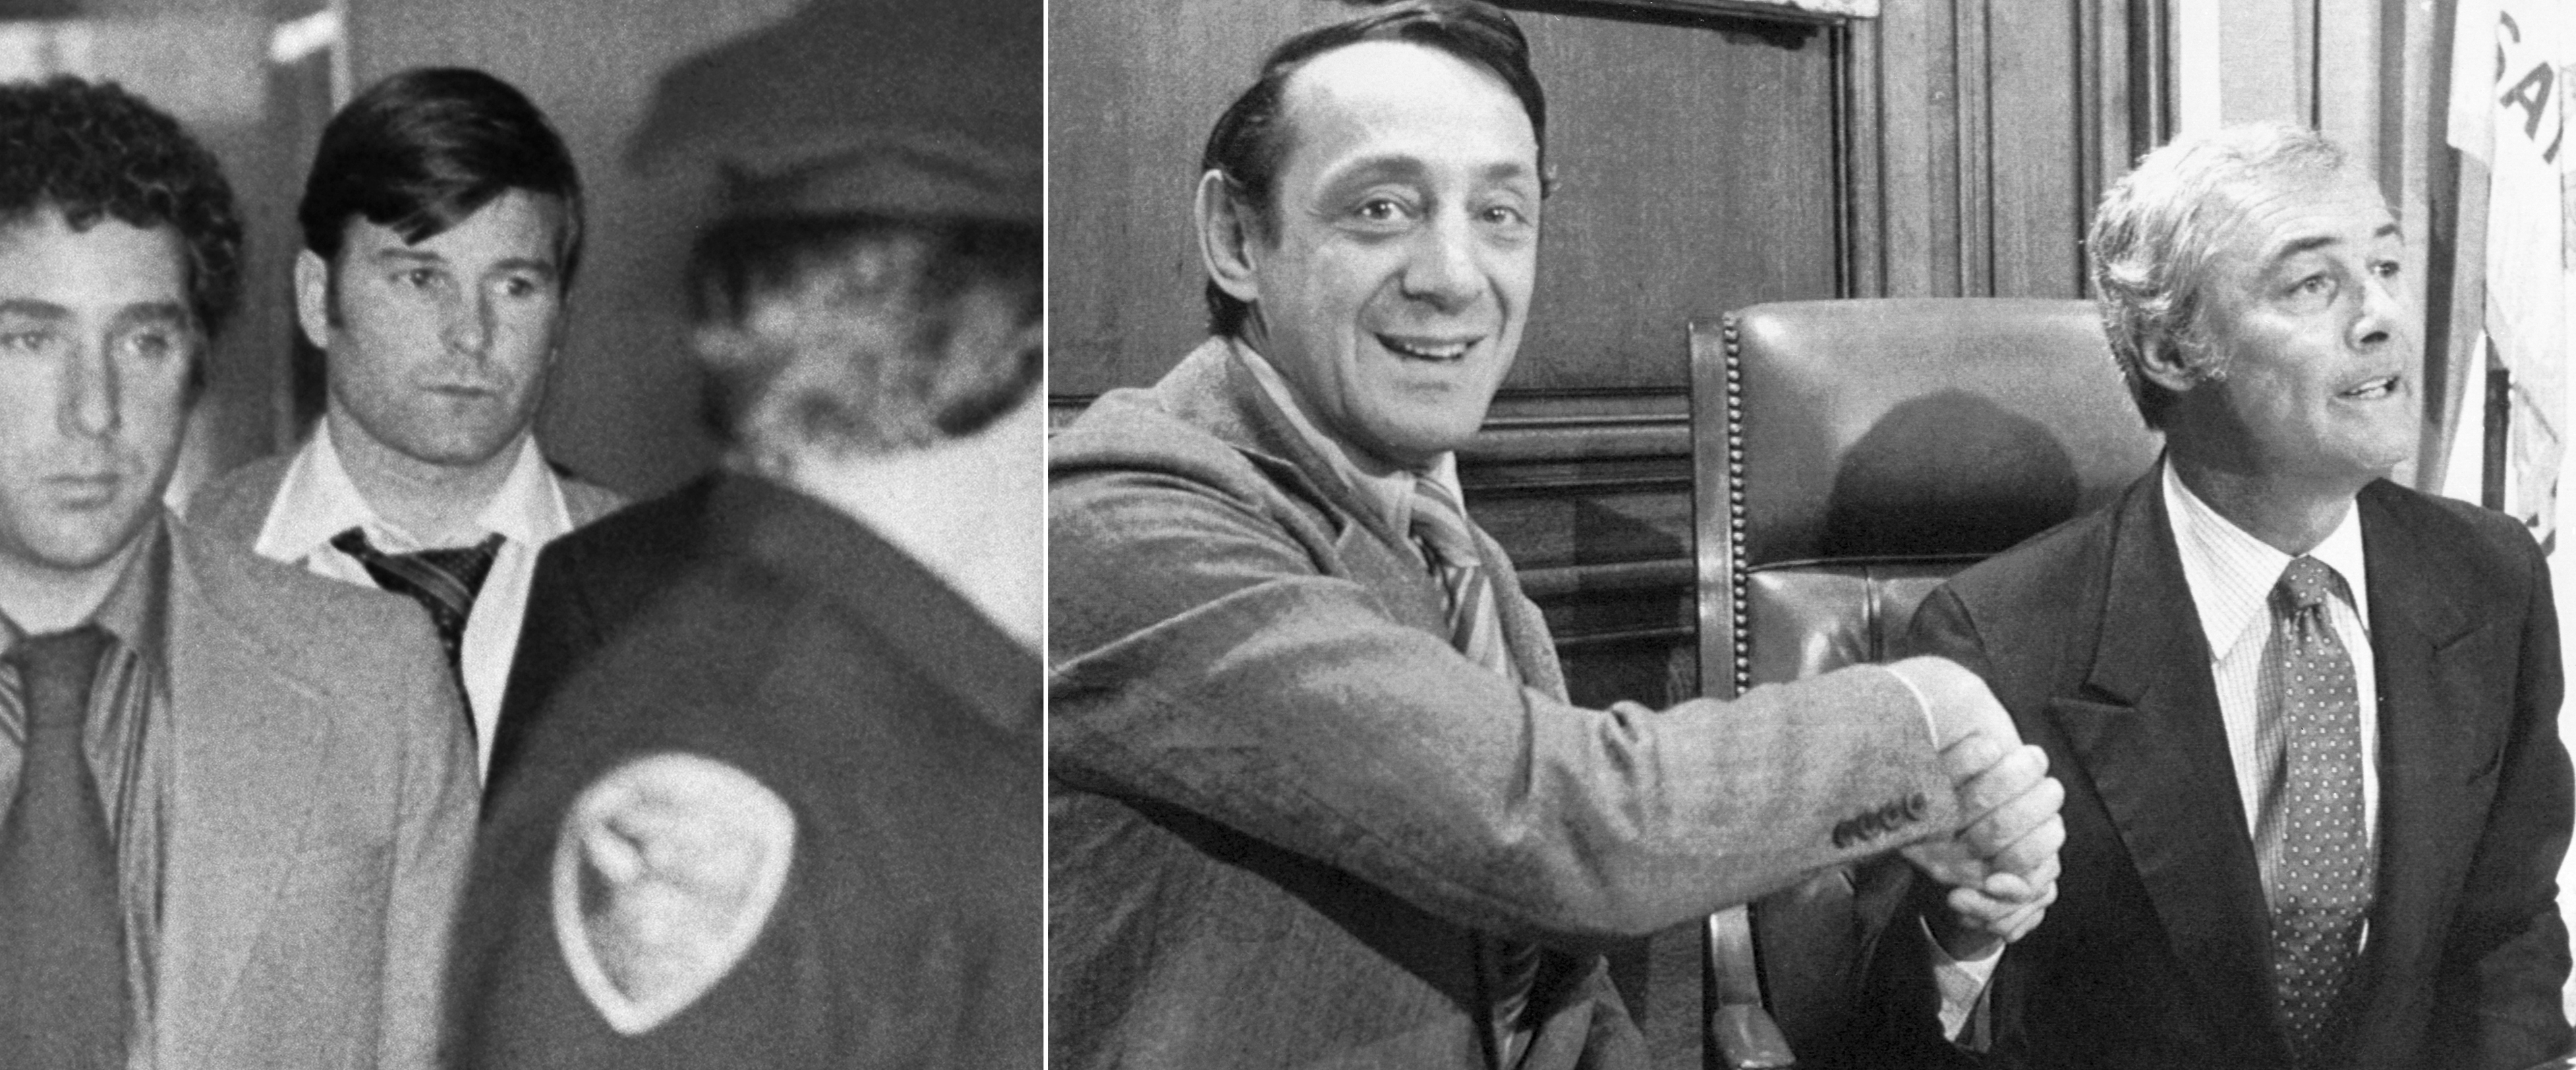 A side by side photo of San Francisco Supervisor Dan White, left, being led by police officers and City supervisor Harvey Milk and San Francisco mayor George Moscone shaking hands.